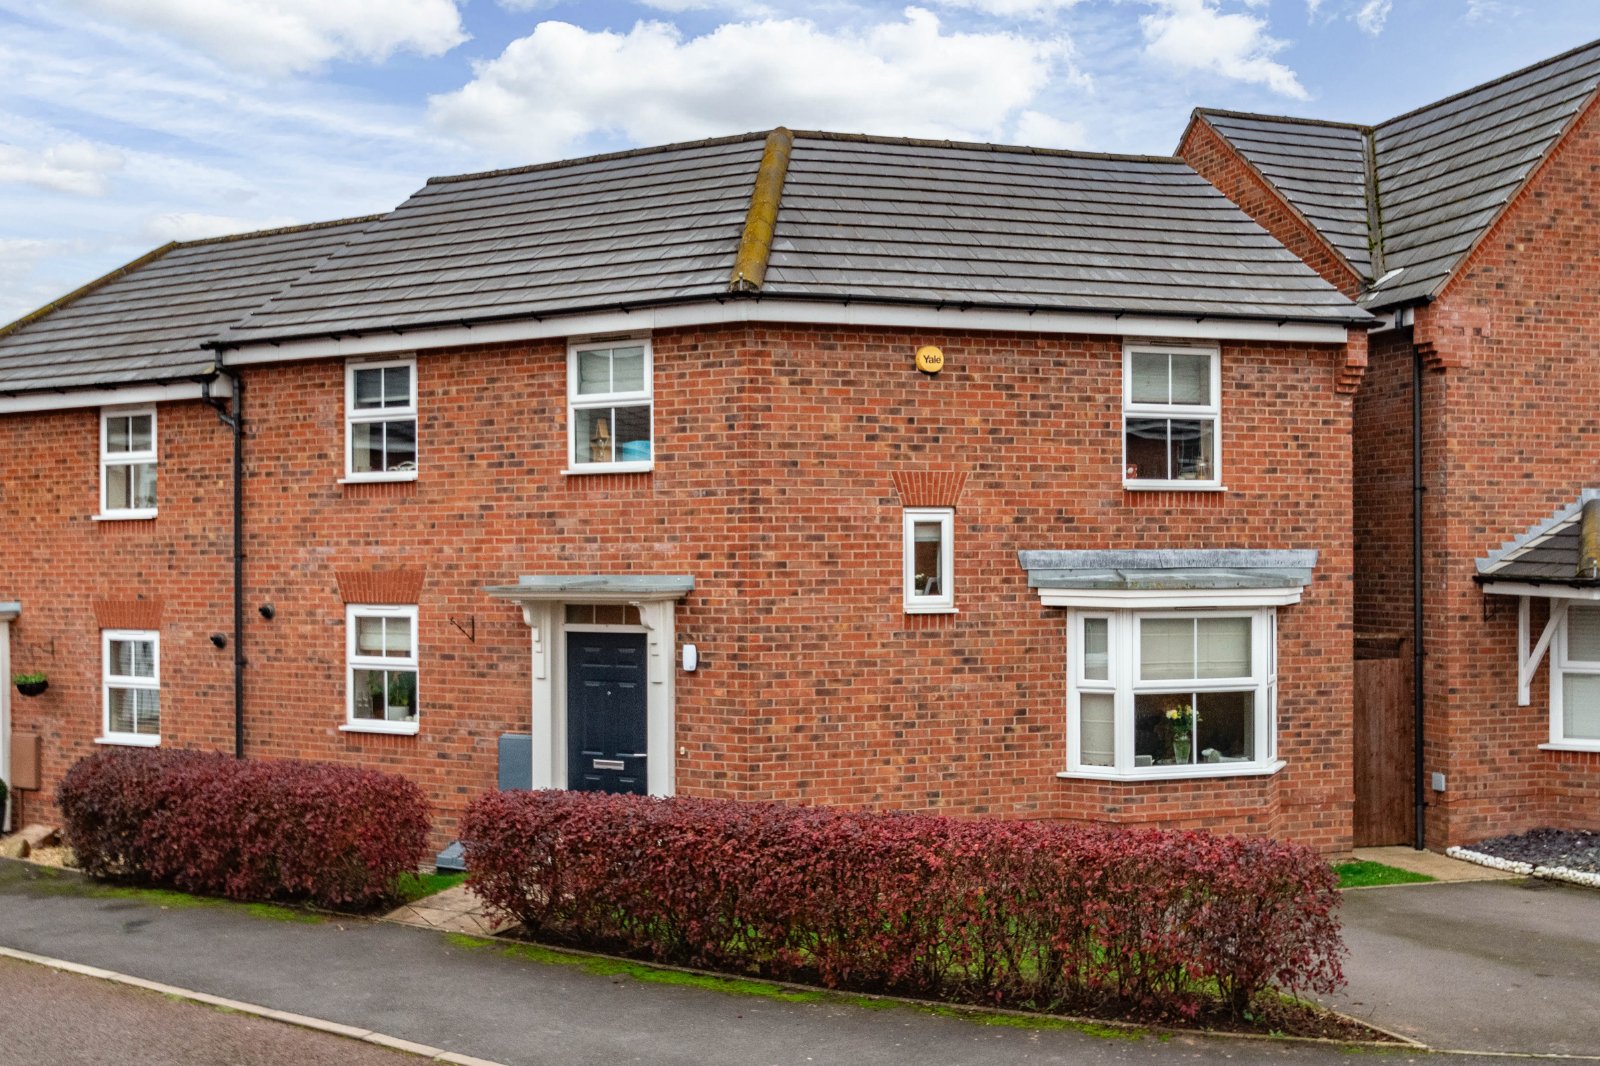 3 bed house for sale in John Corbett Drive, Amblecote - Property Image 1